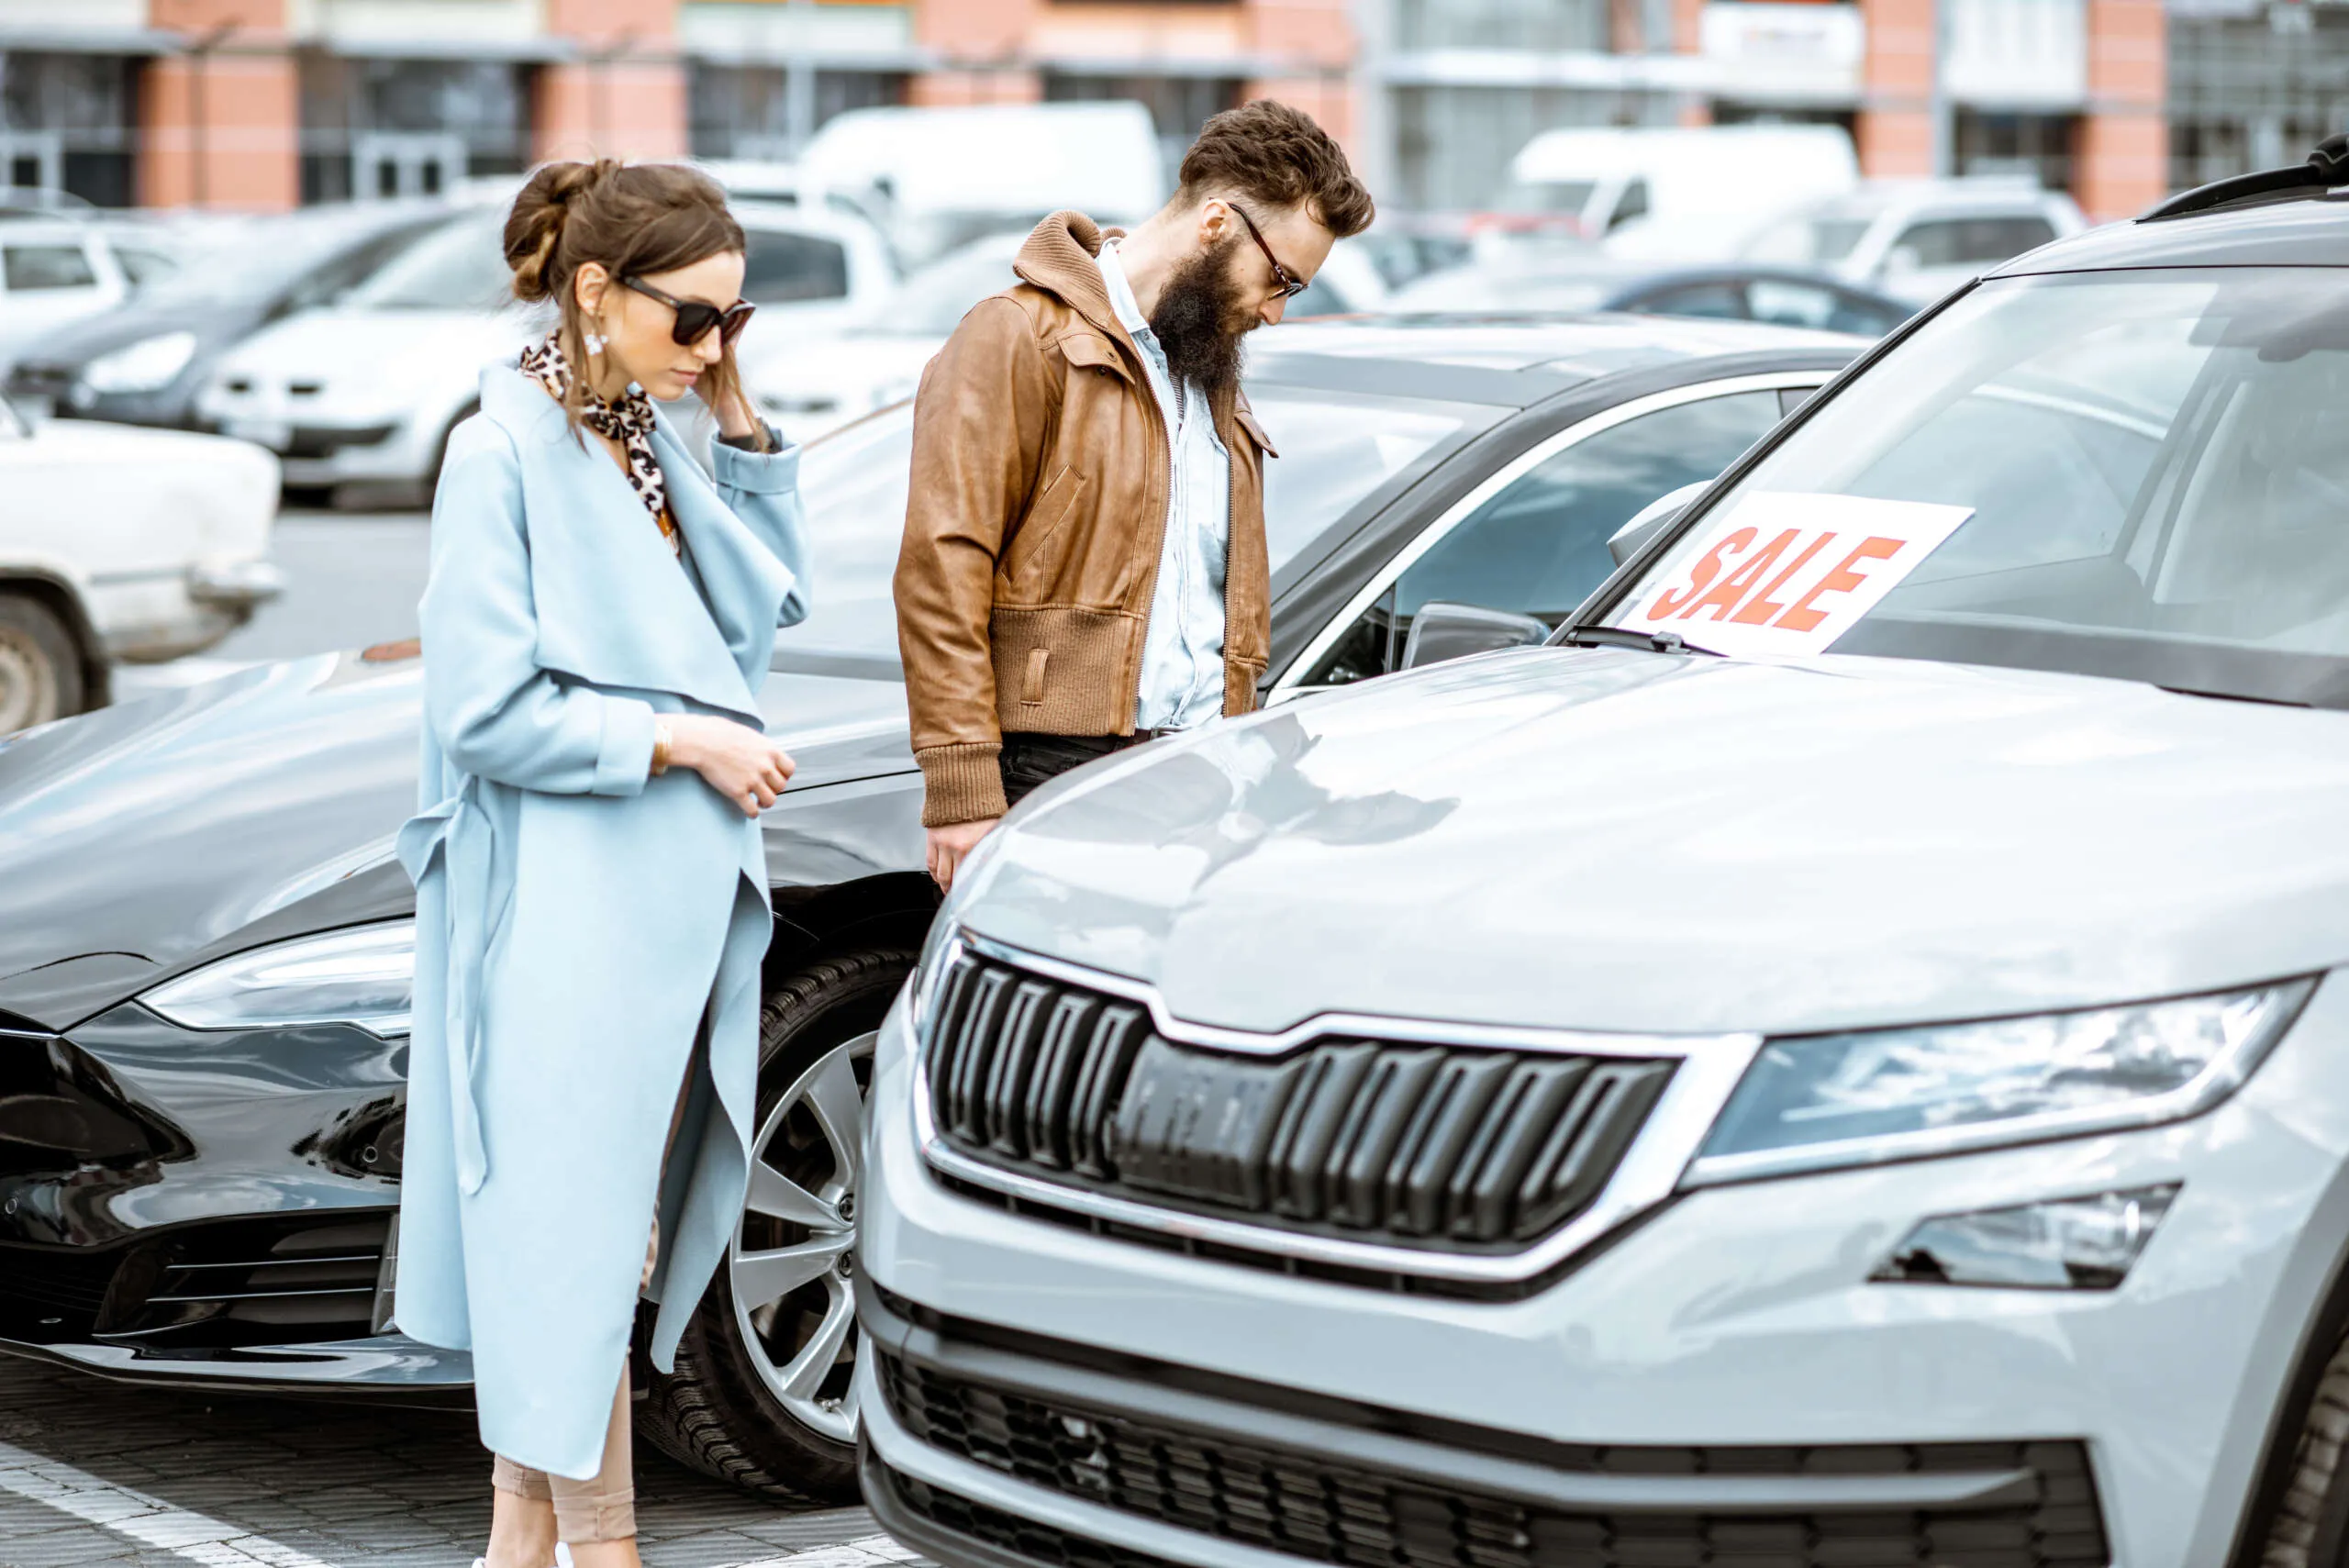 How To Negotiate The Best Price On a Used Car